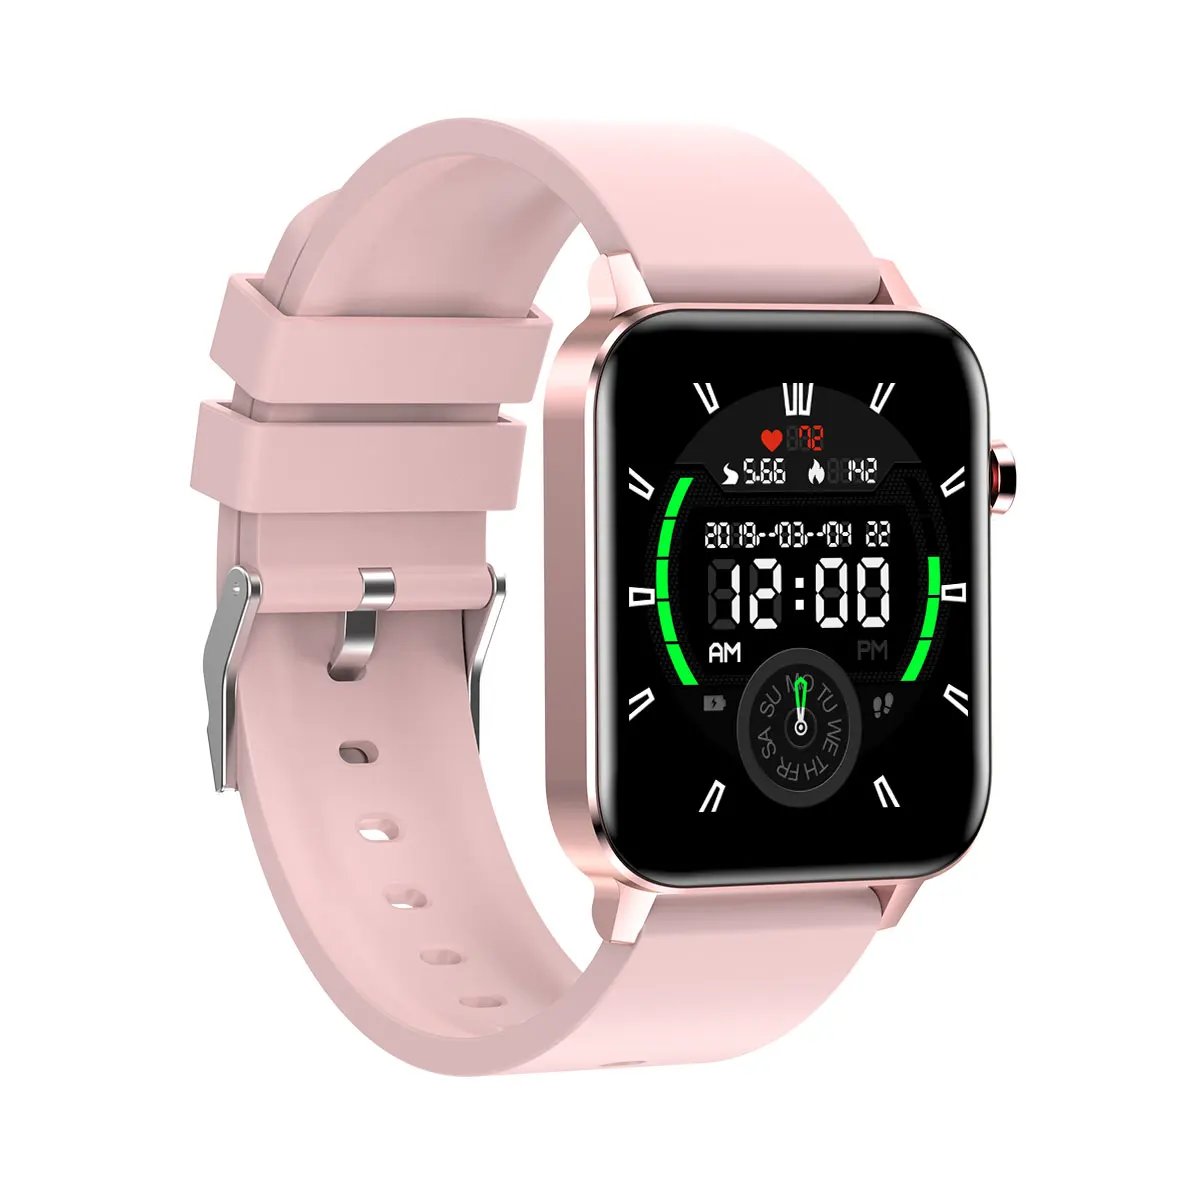 

Nordic Chipset Fashion Style 1.4 Inch Ip68 Waterproof Smart Watch Fitness With Heart Rate Pedometer Blood Pressure